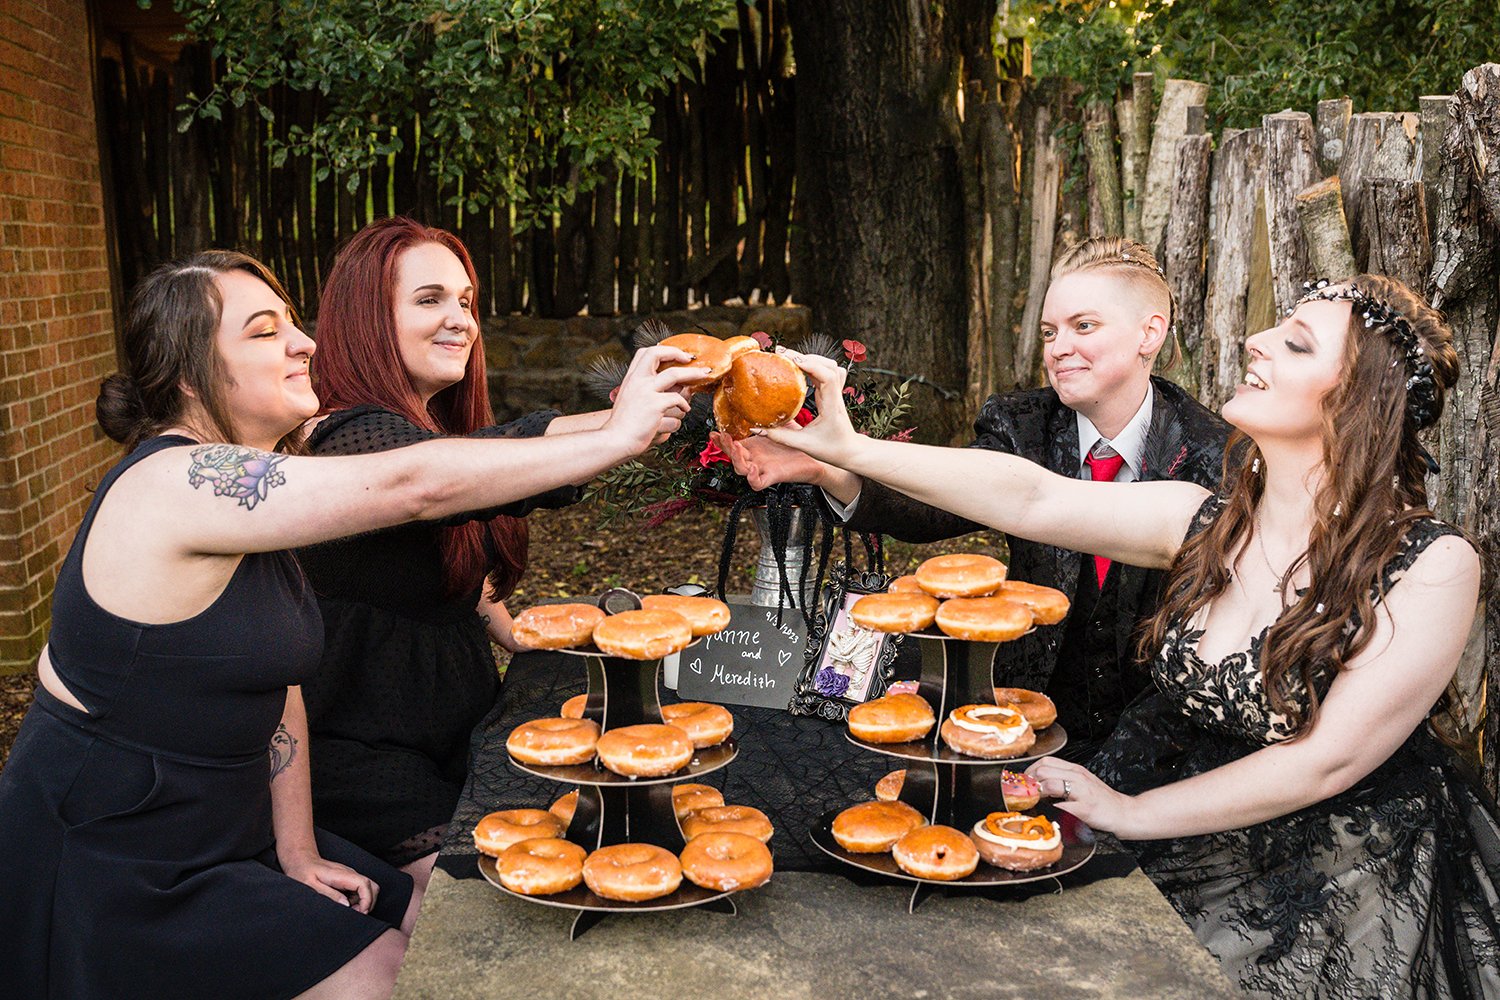 A lesbian wedding couple and their wedding party sit at a stone table and “clink” donuts on their elopement day at a Roanoke Airbnb.